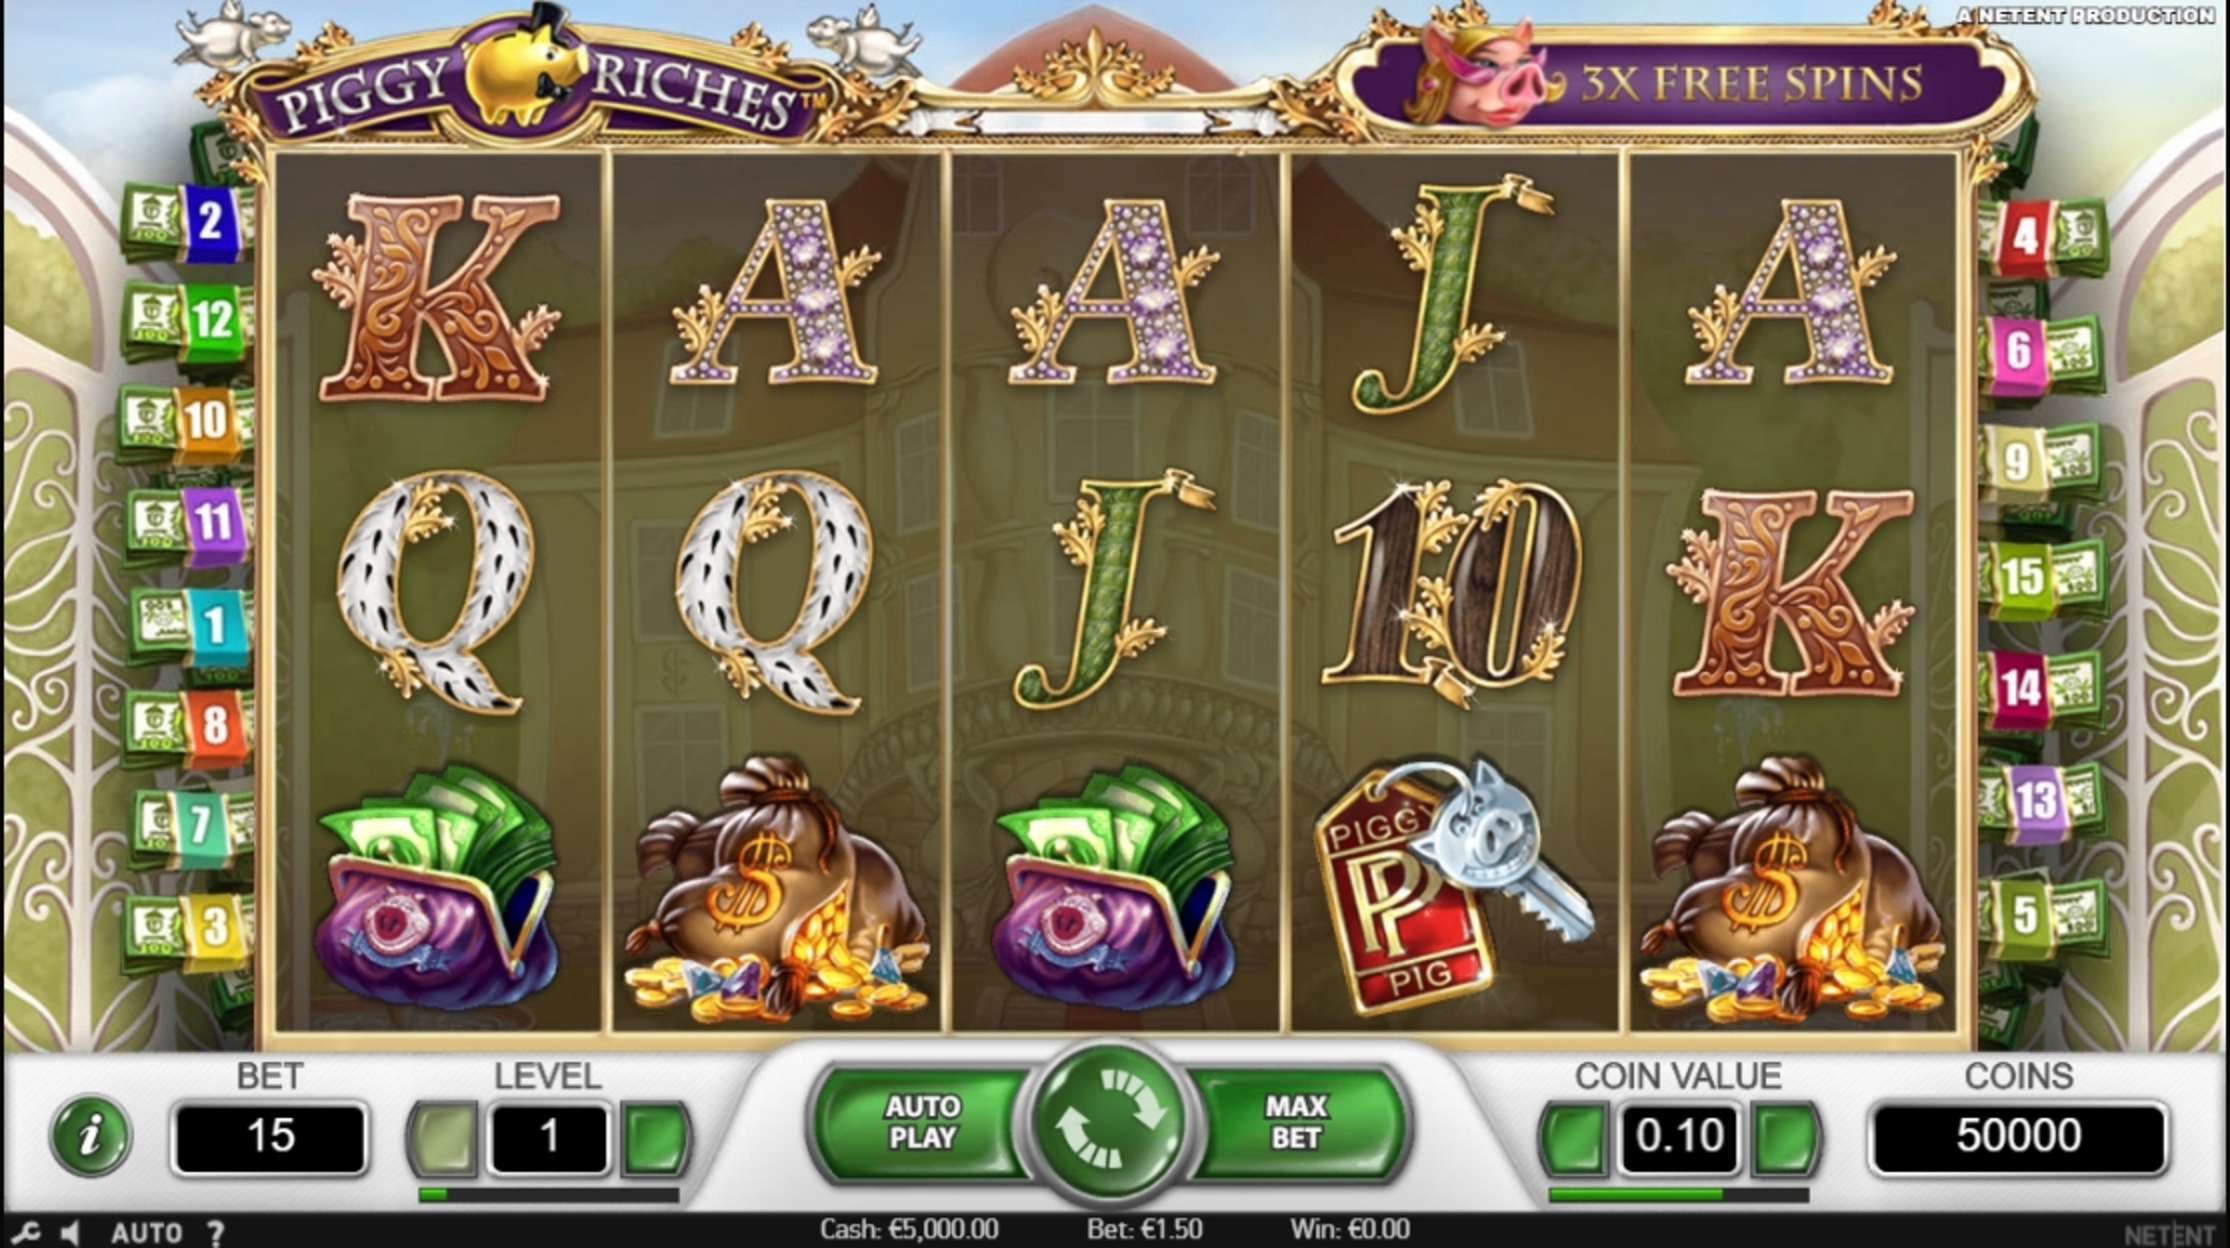 Reels in Piggy Riches Slot Game by NetEnt